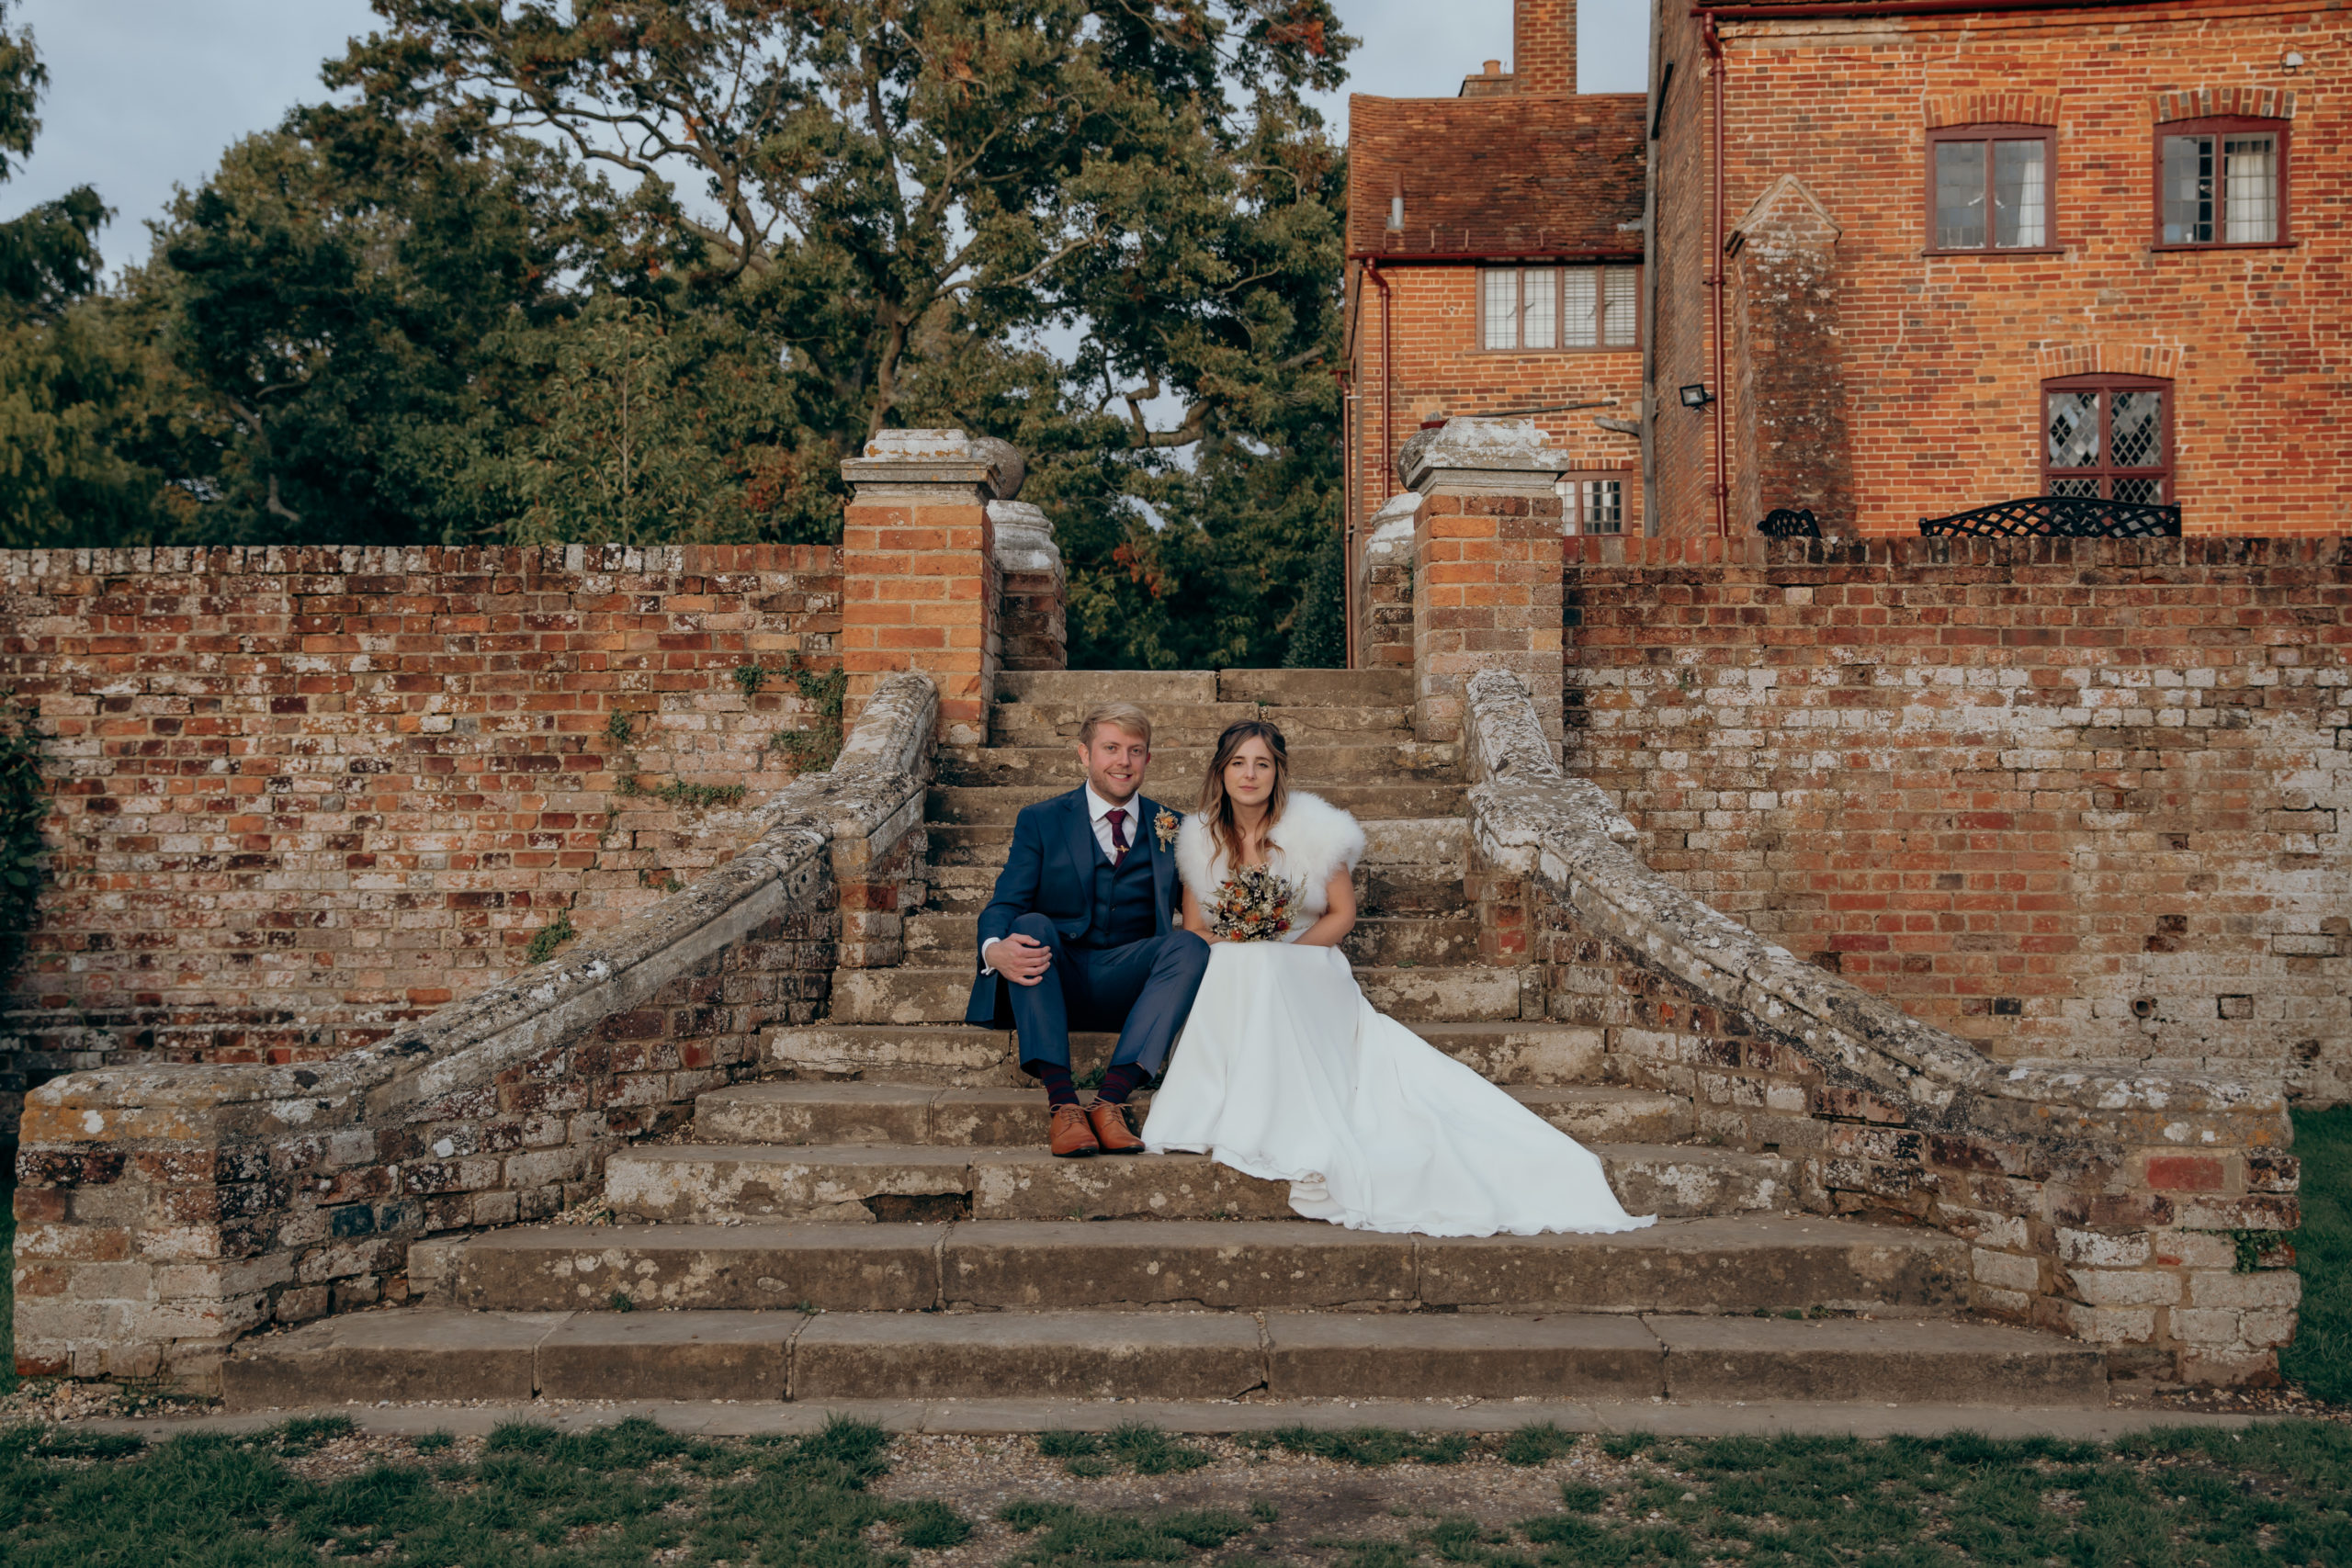 Lisa and Jason sat on the steps of Ufton Court's gardens on their wedding day